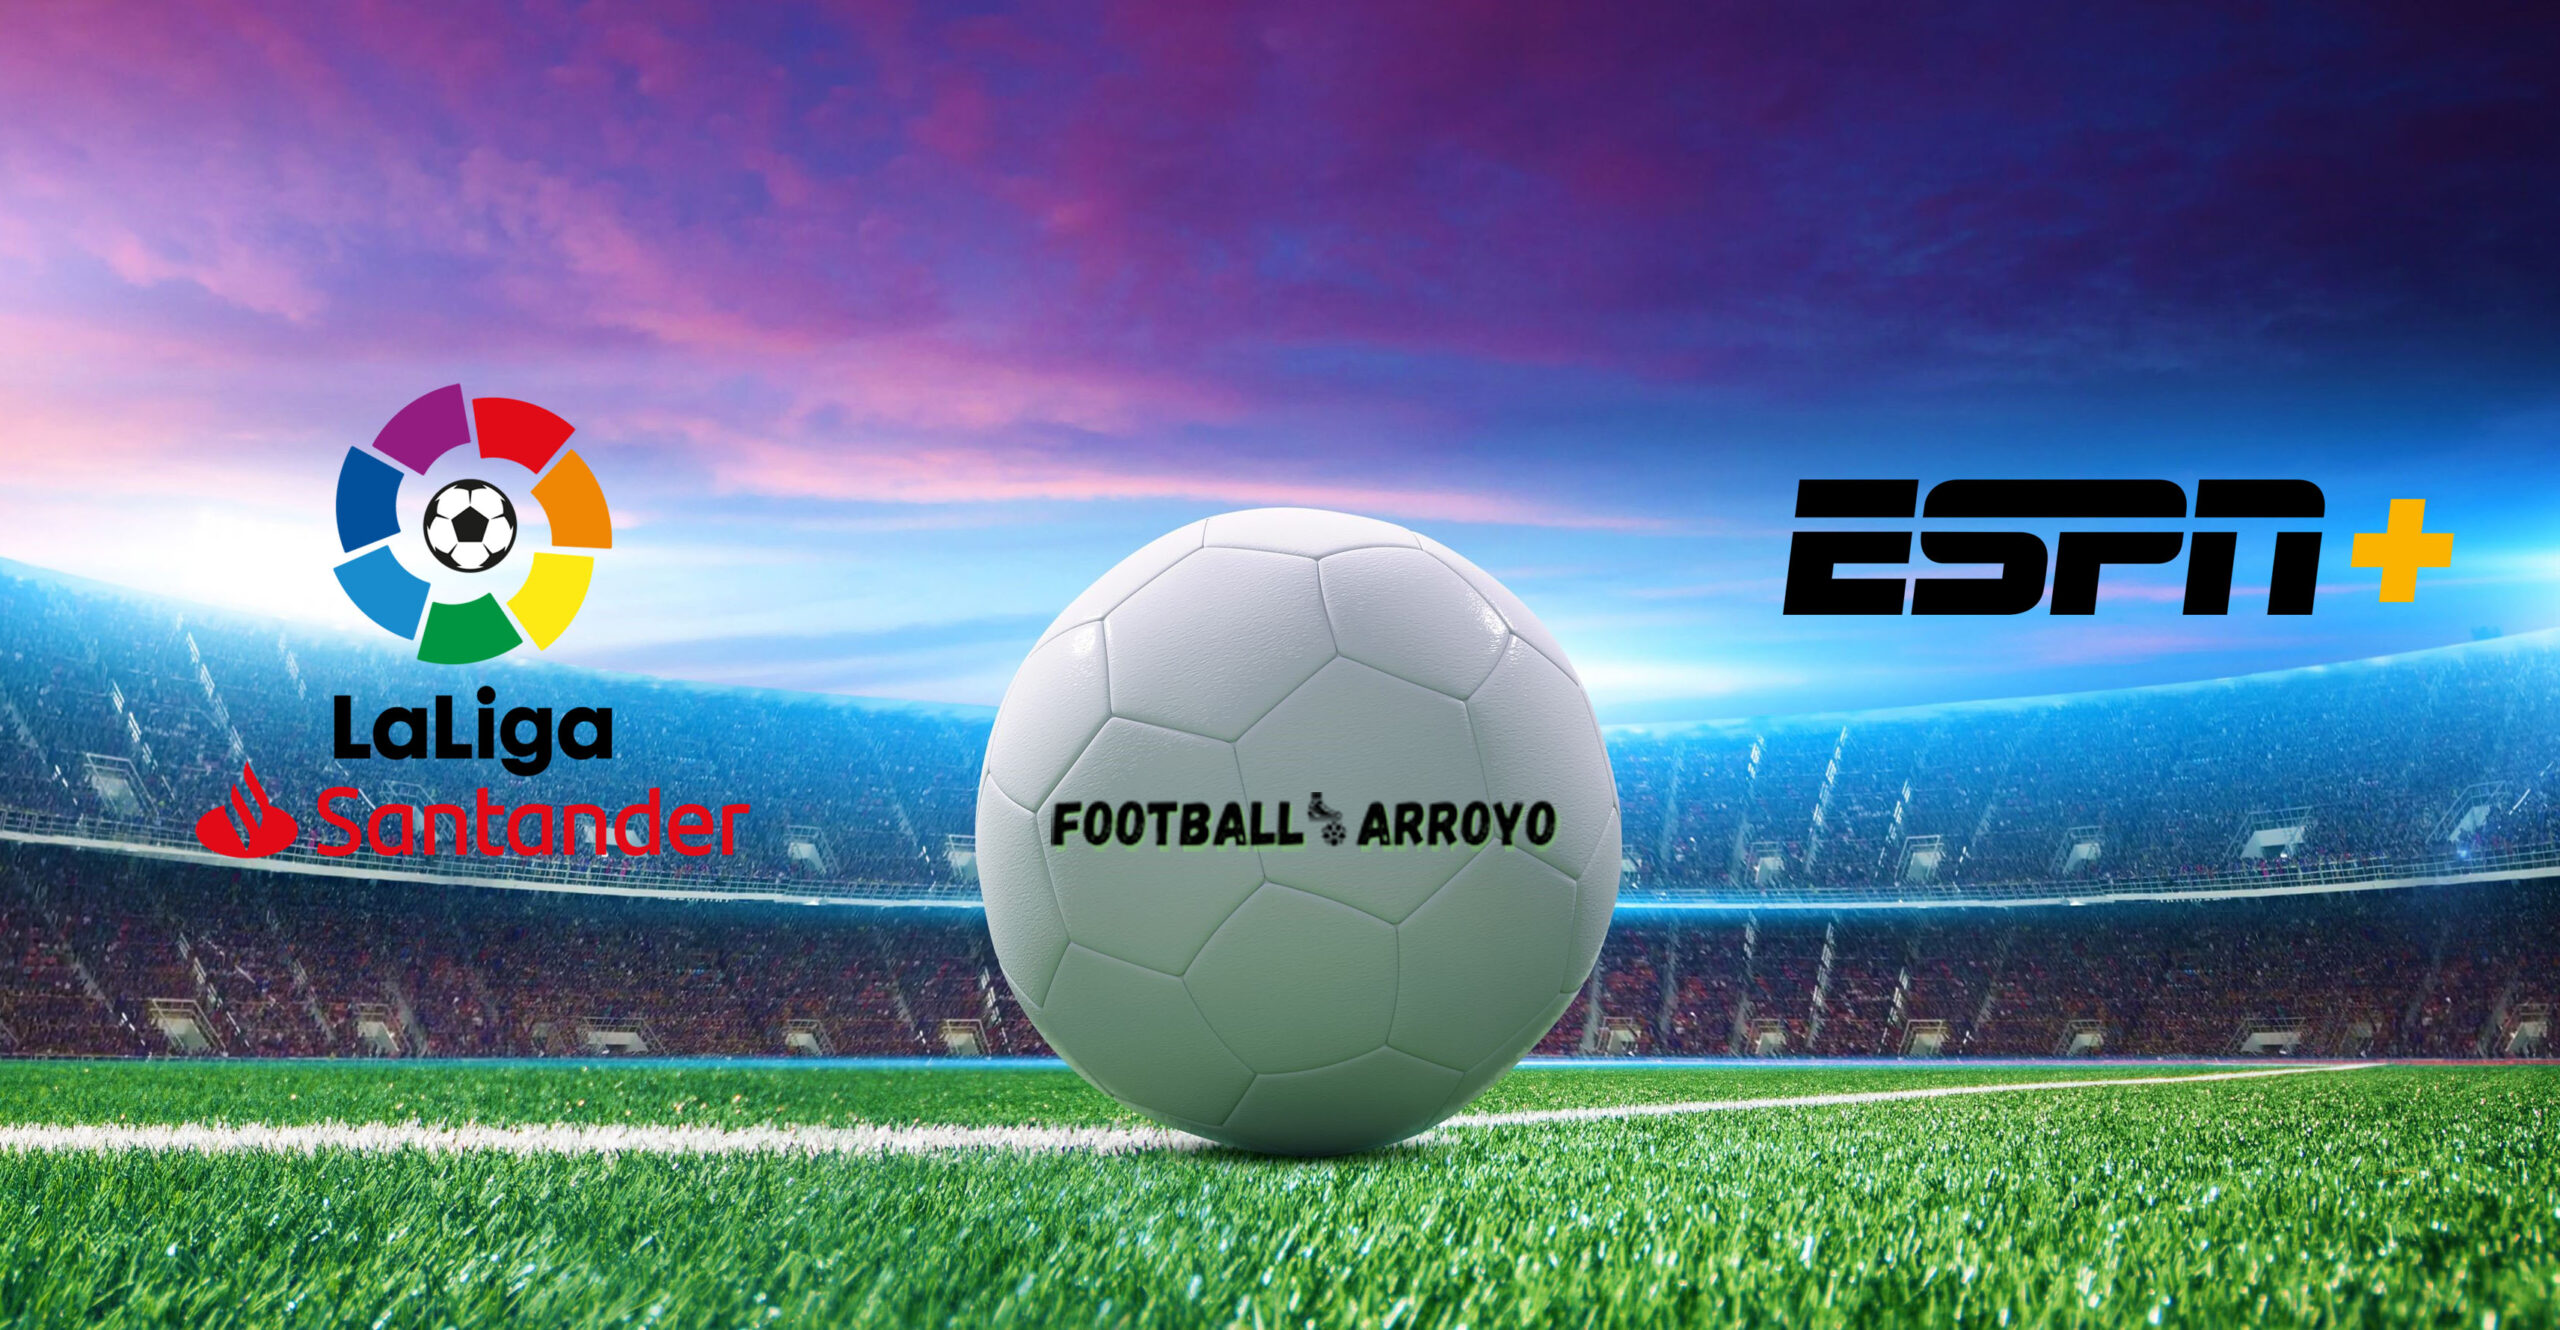 How to watch LaLiga in USA on ESPN